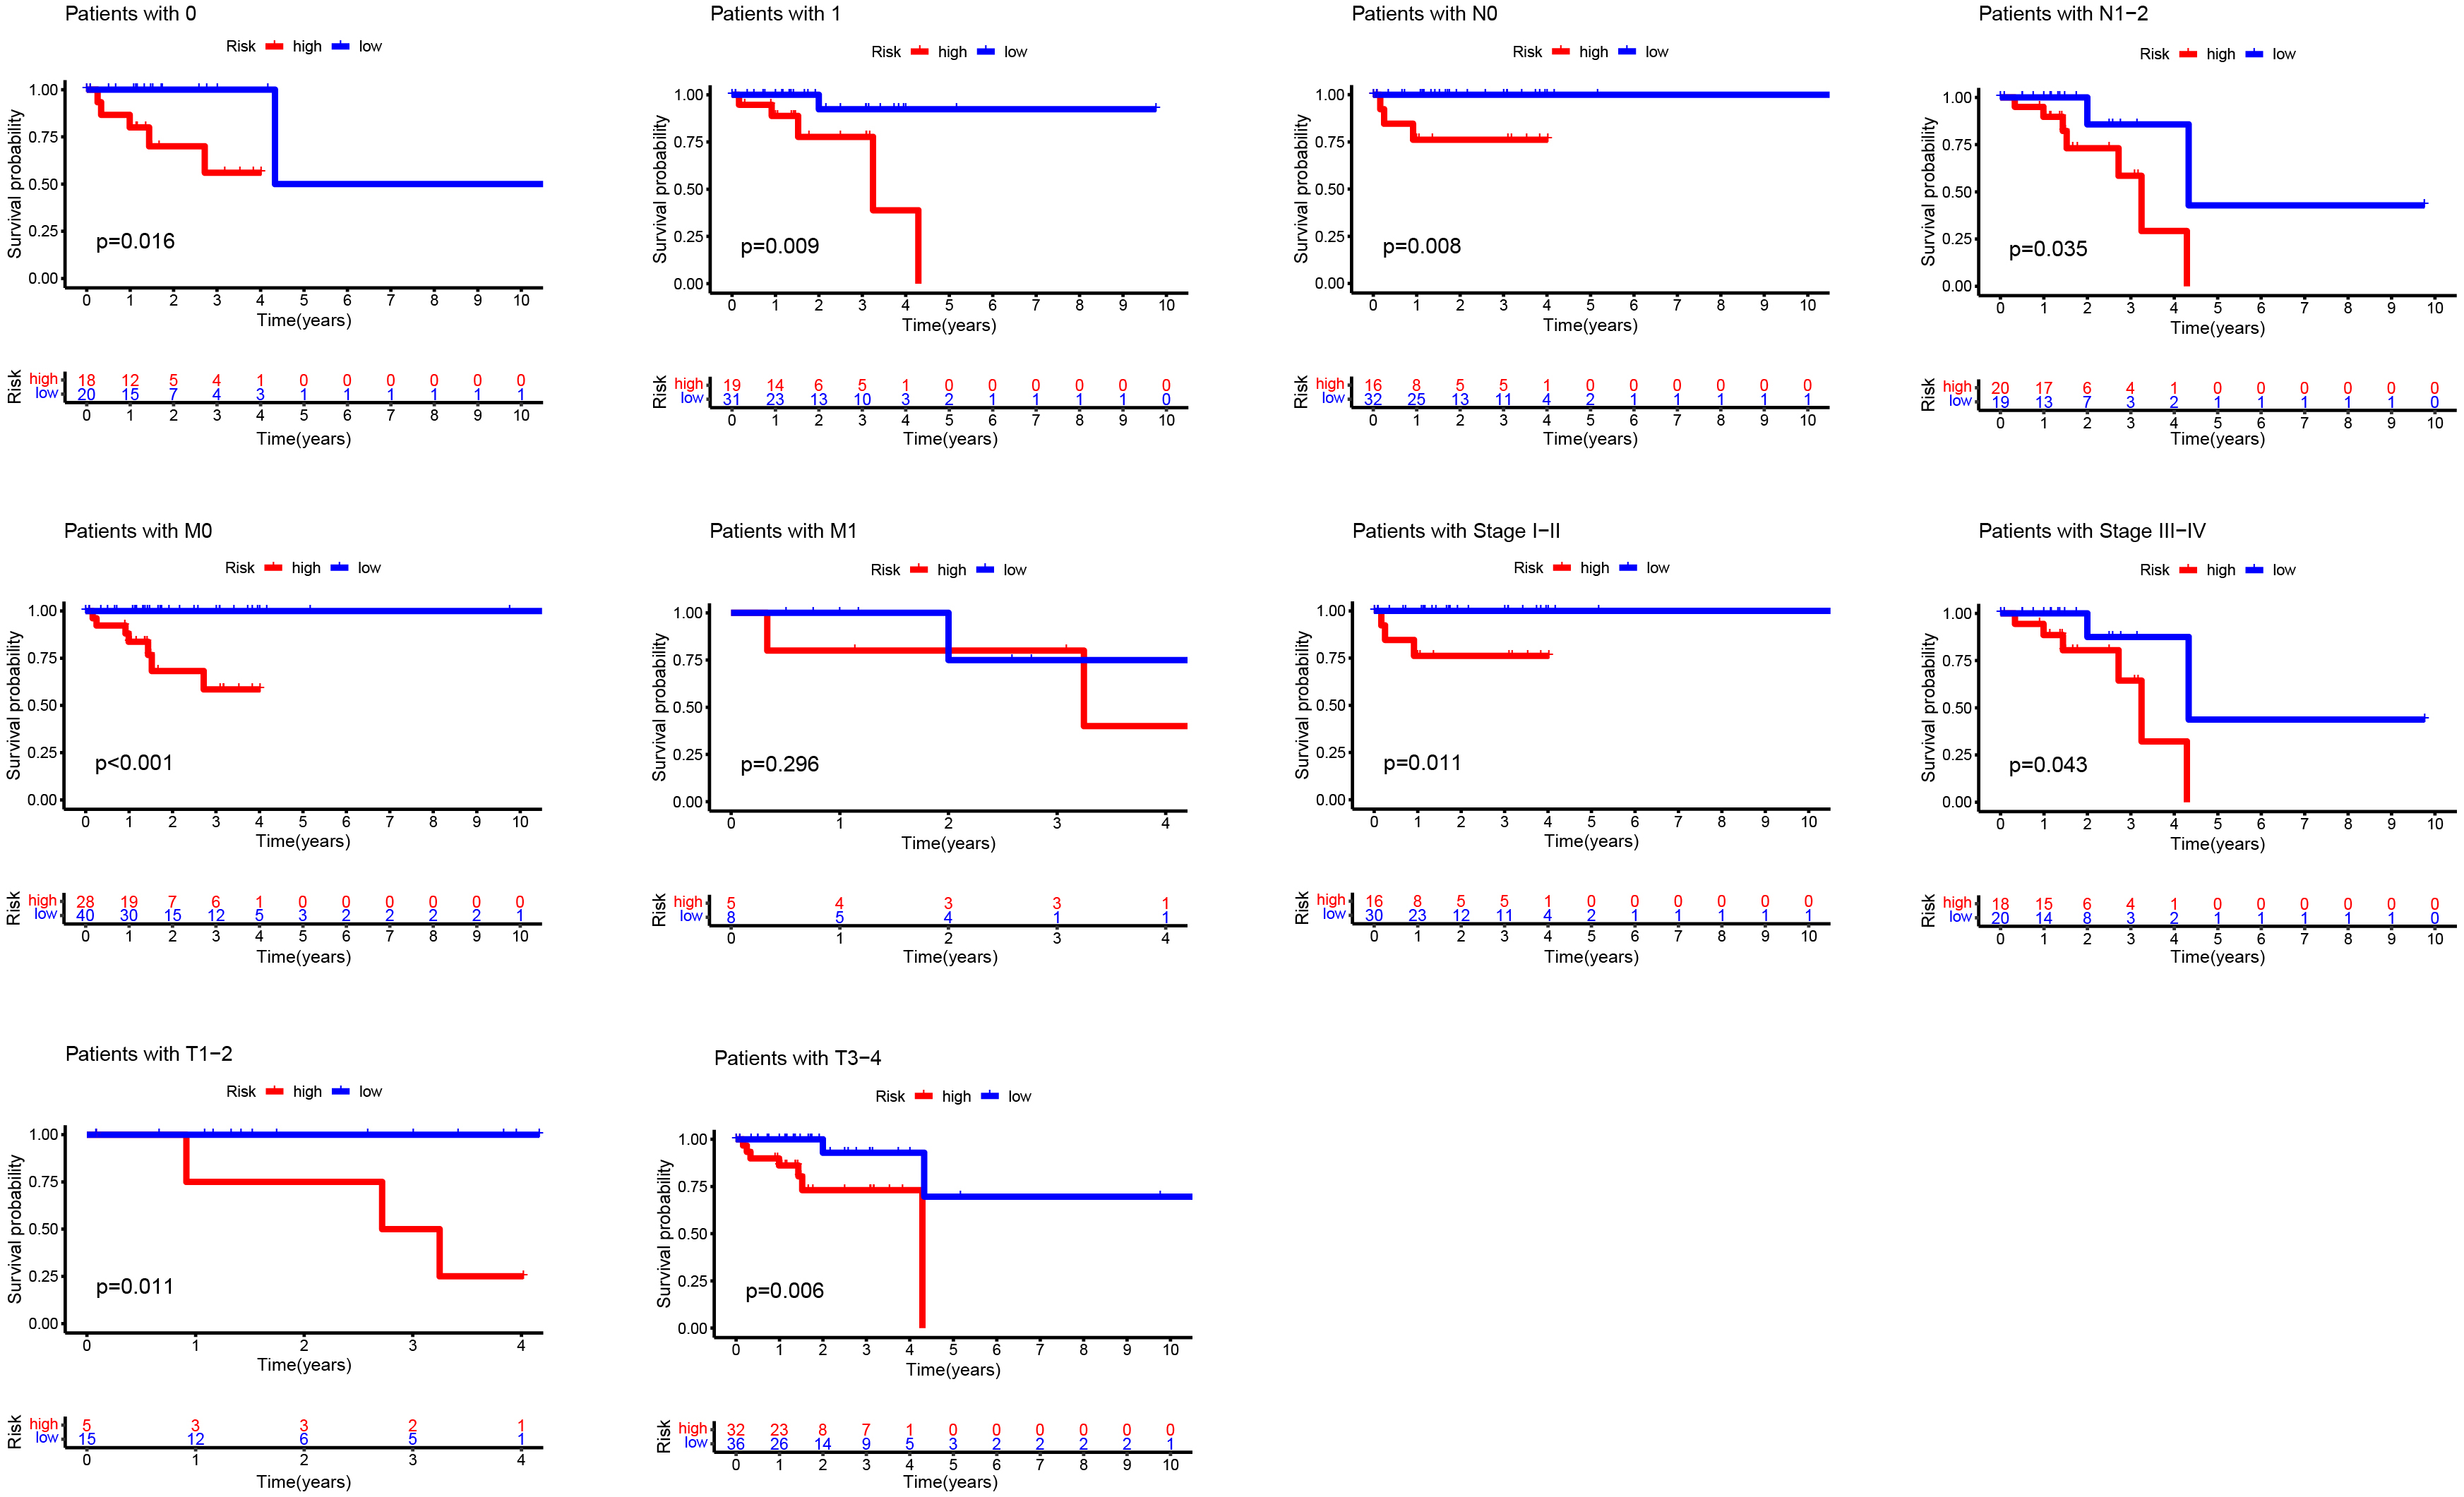 Kaplan-Meier curves of OS differences stratifified by gender, tumor grade, or TNM stage between the high- and low-risk groups in the TCGA entire set.